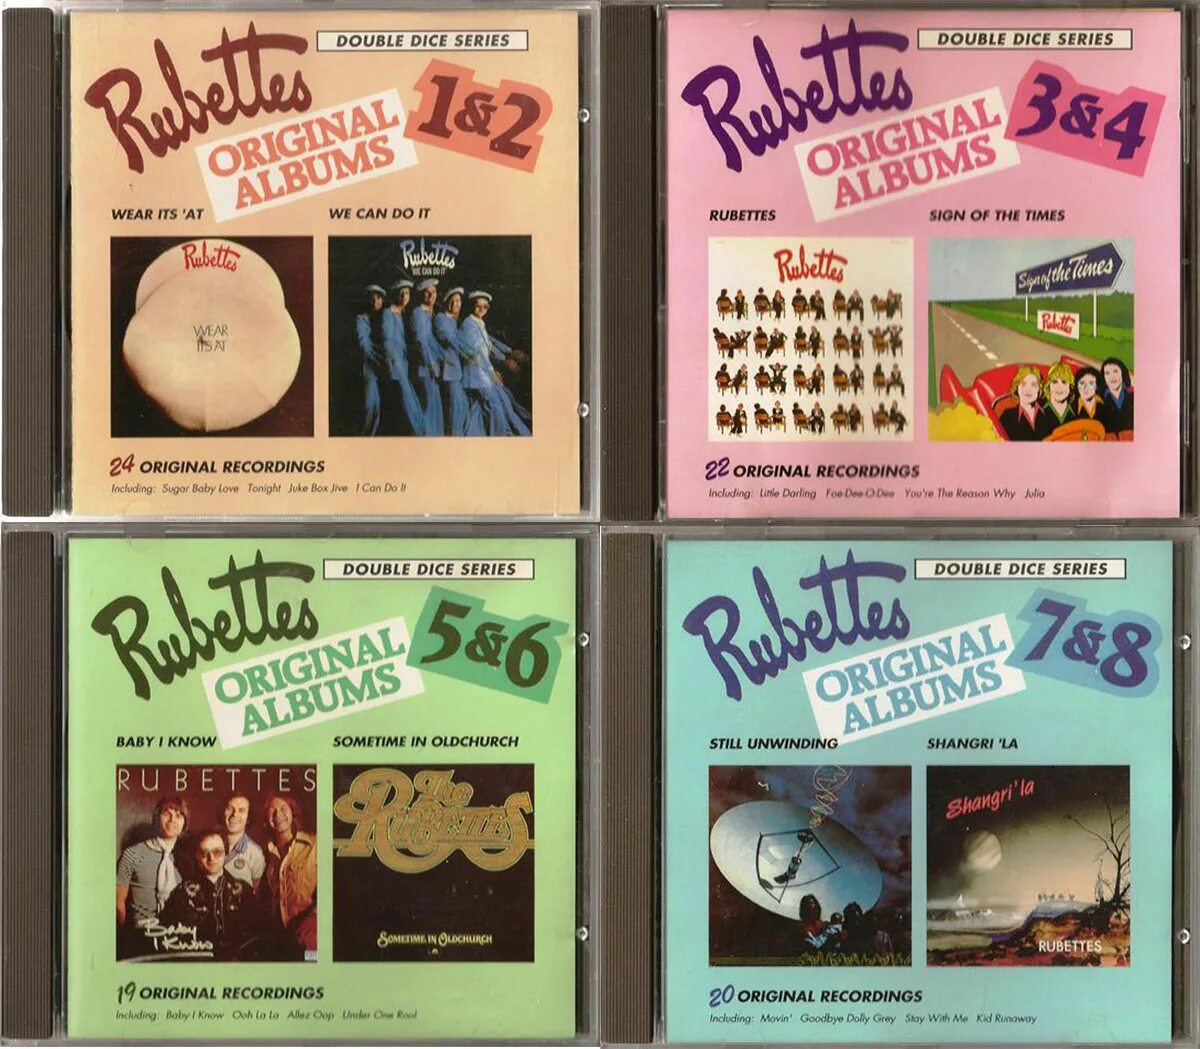 The Rubettes 1975 we can do it. The Rubettes – (1976) sign of the times. The Rubettes sometime in oldchurch 1978. The Rubettes - sign of the times. Its me wear